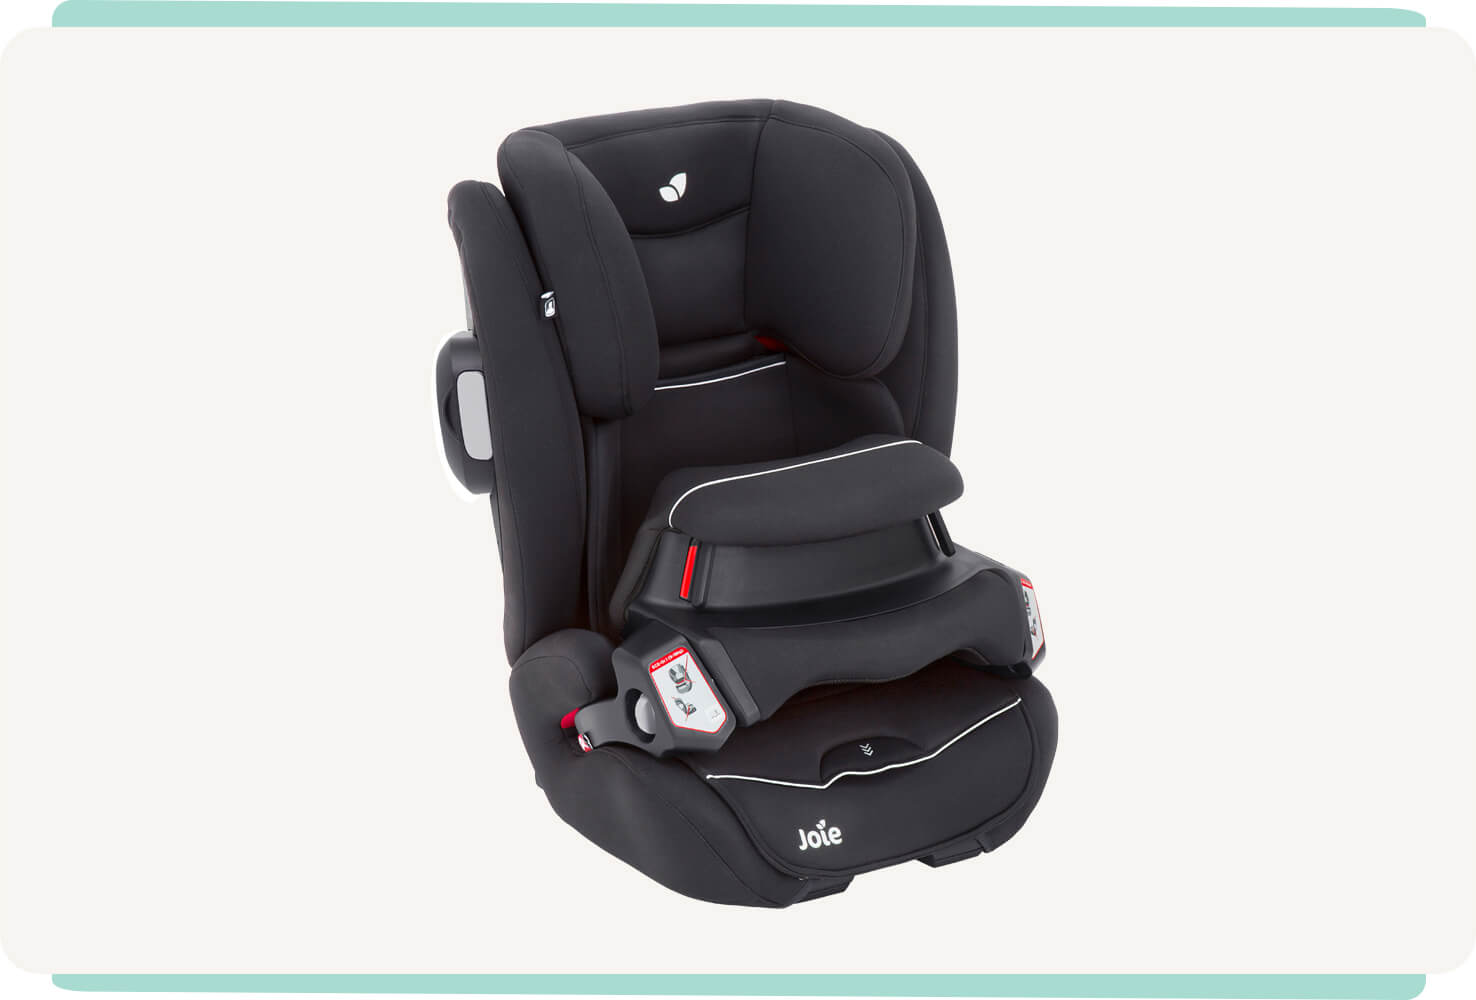   A black Transcend booster car seat facing at an angle toward the right.